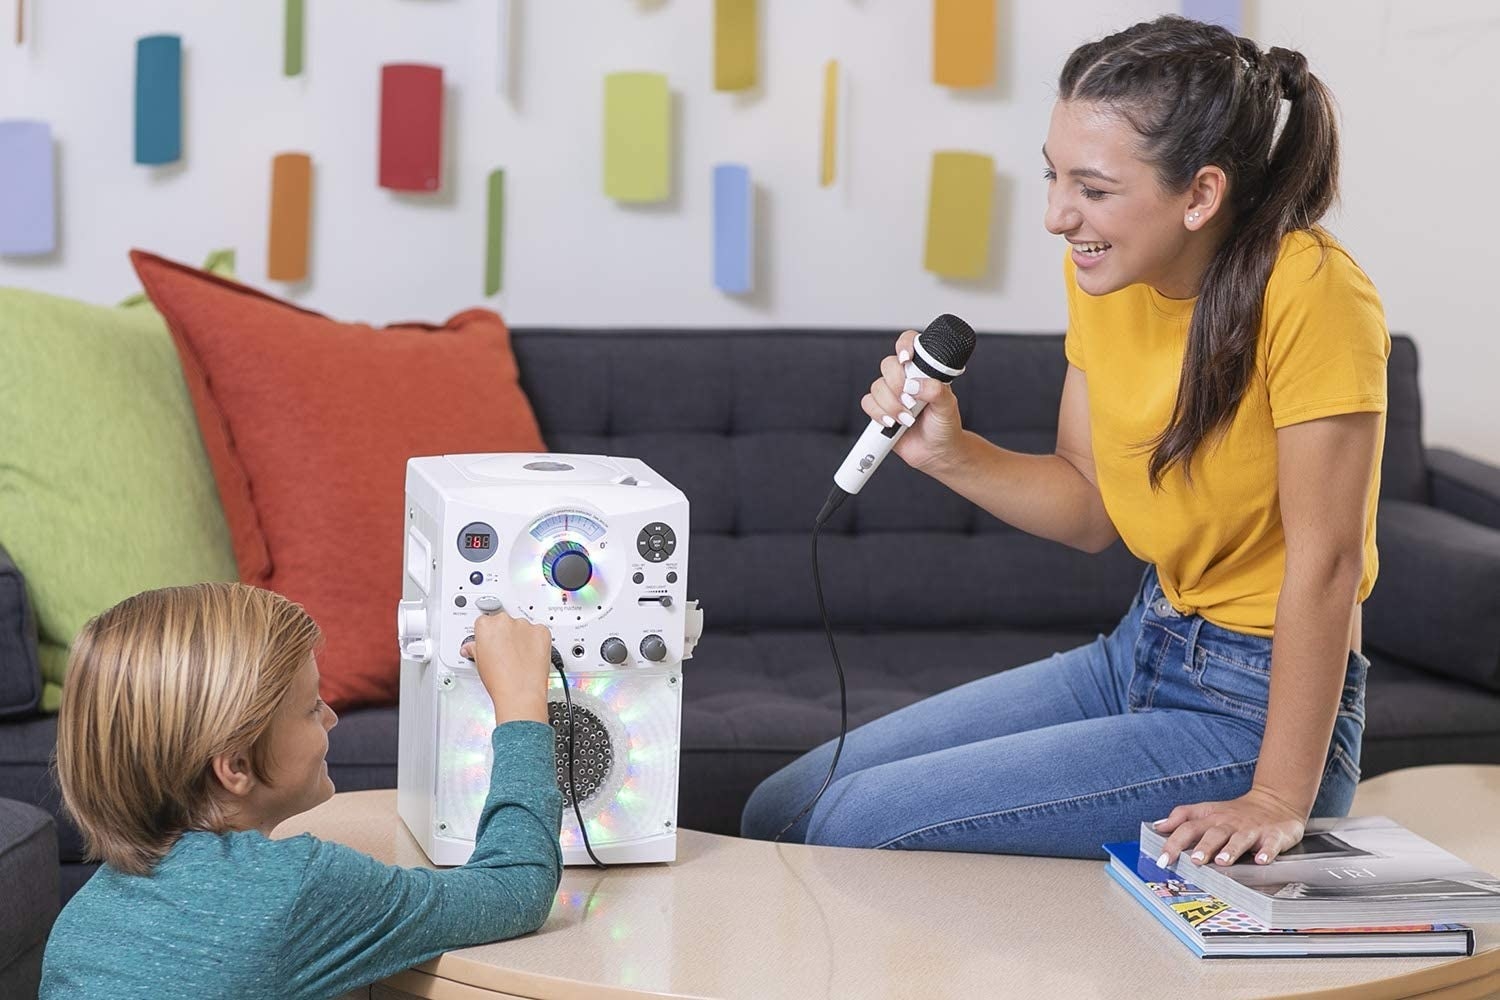 kids play with white karaoke machine that comes with microphone and LED disco lights